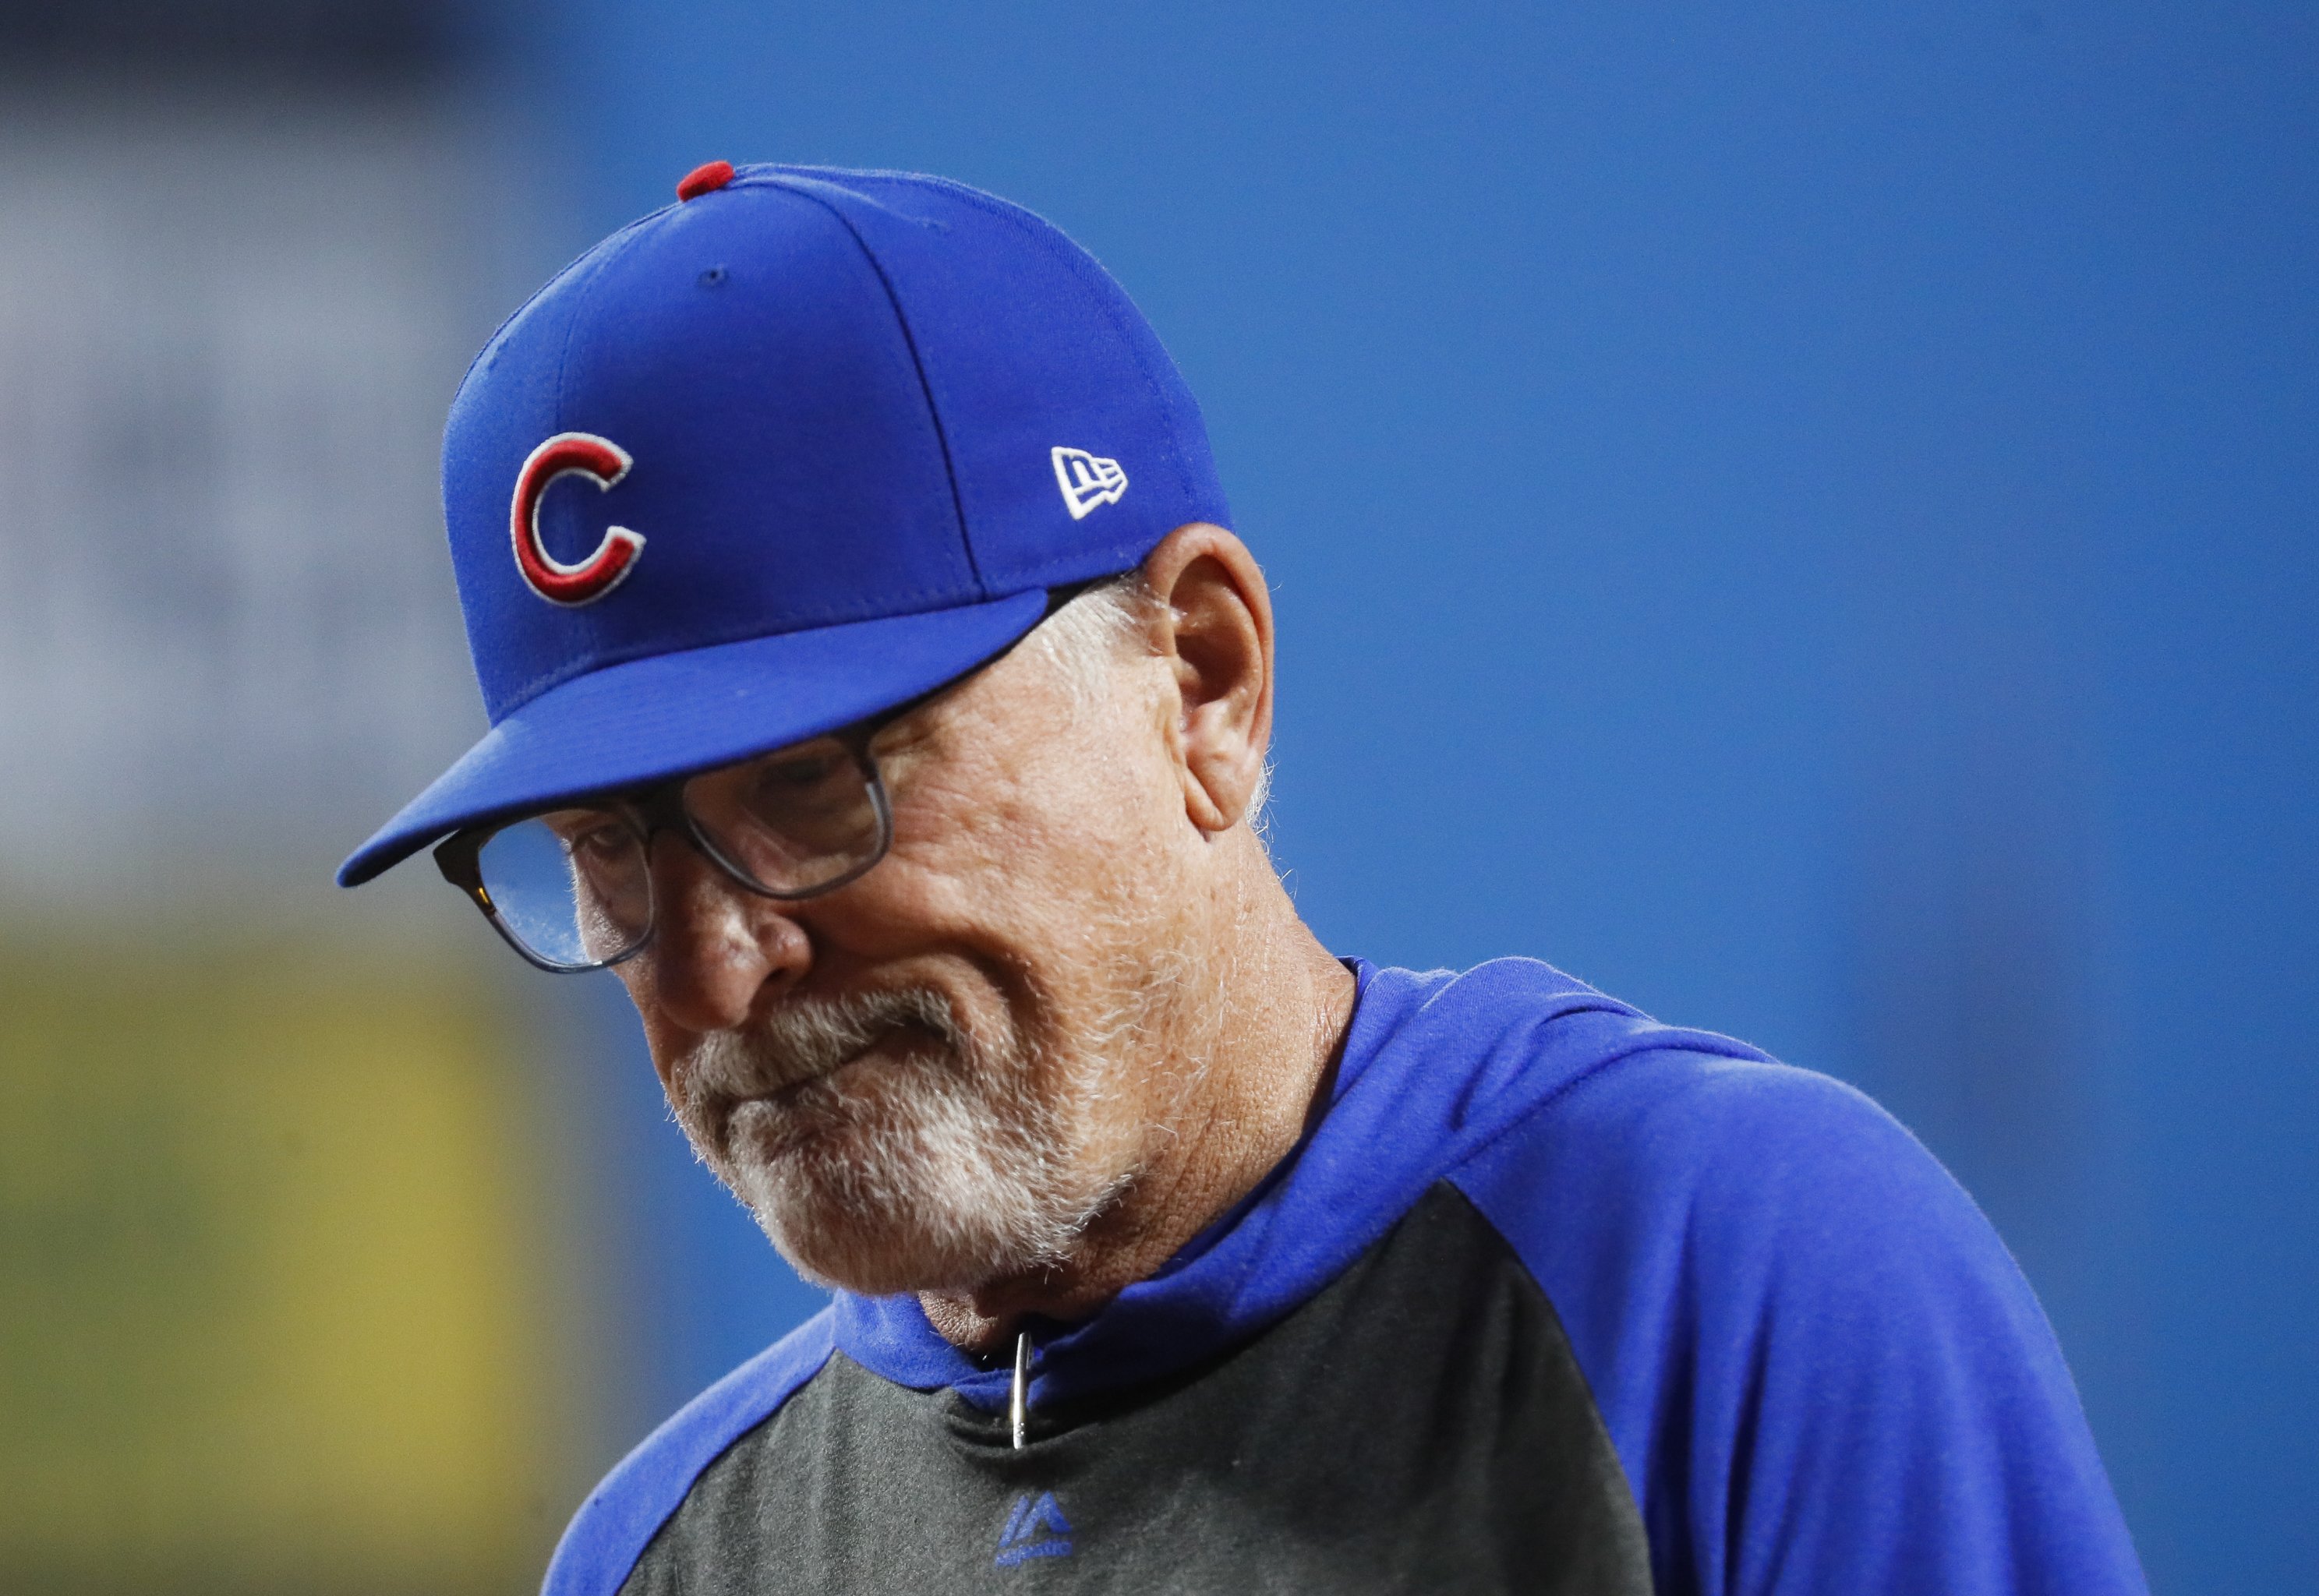 Why is the anti-Joe Maddon angle so strong among Cubs fans